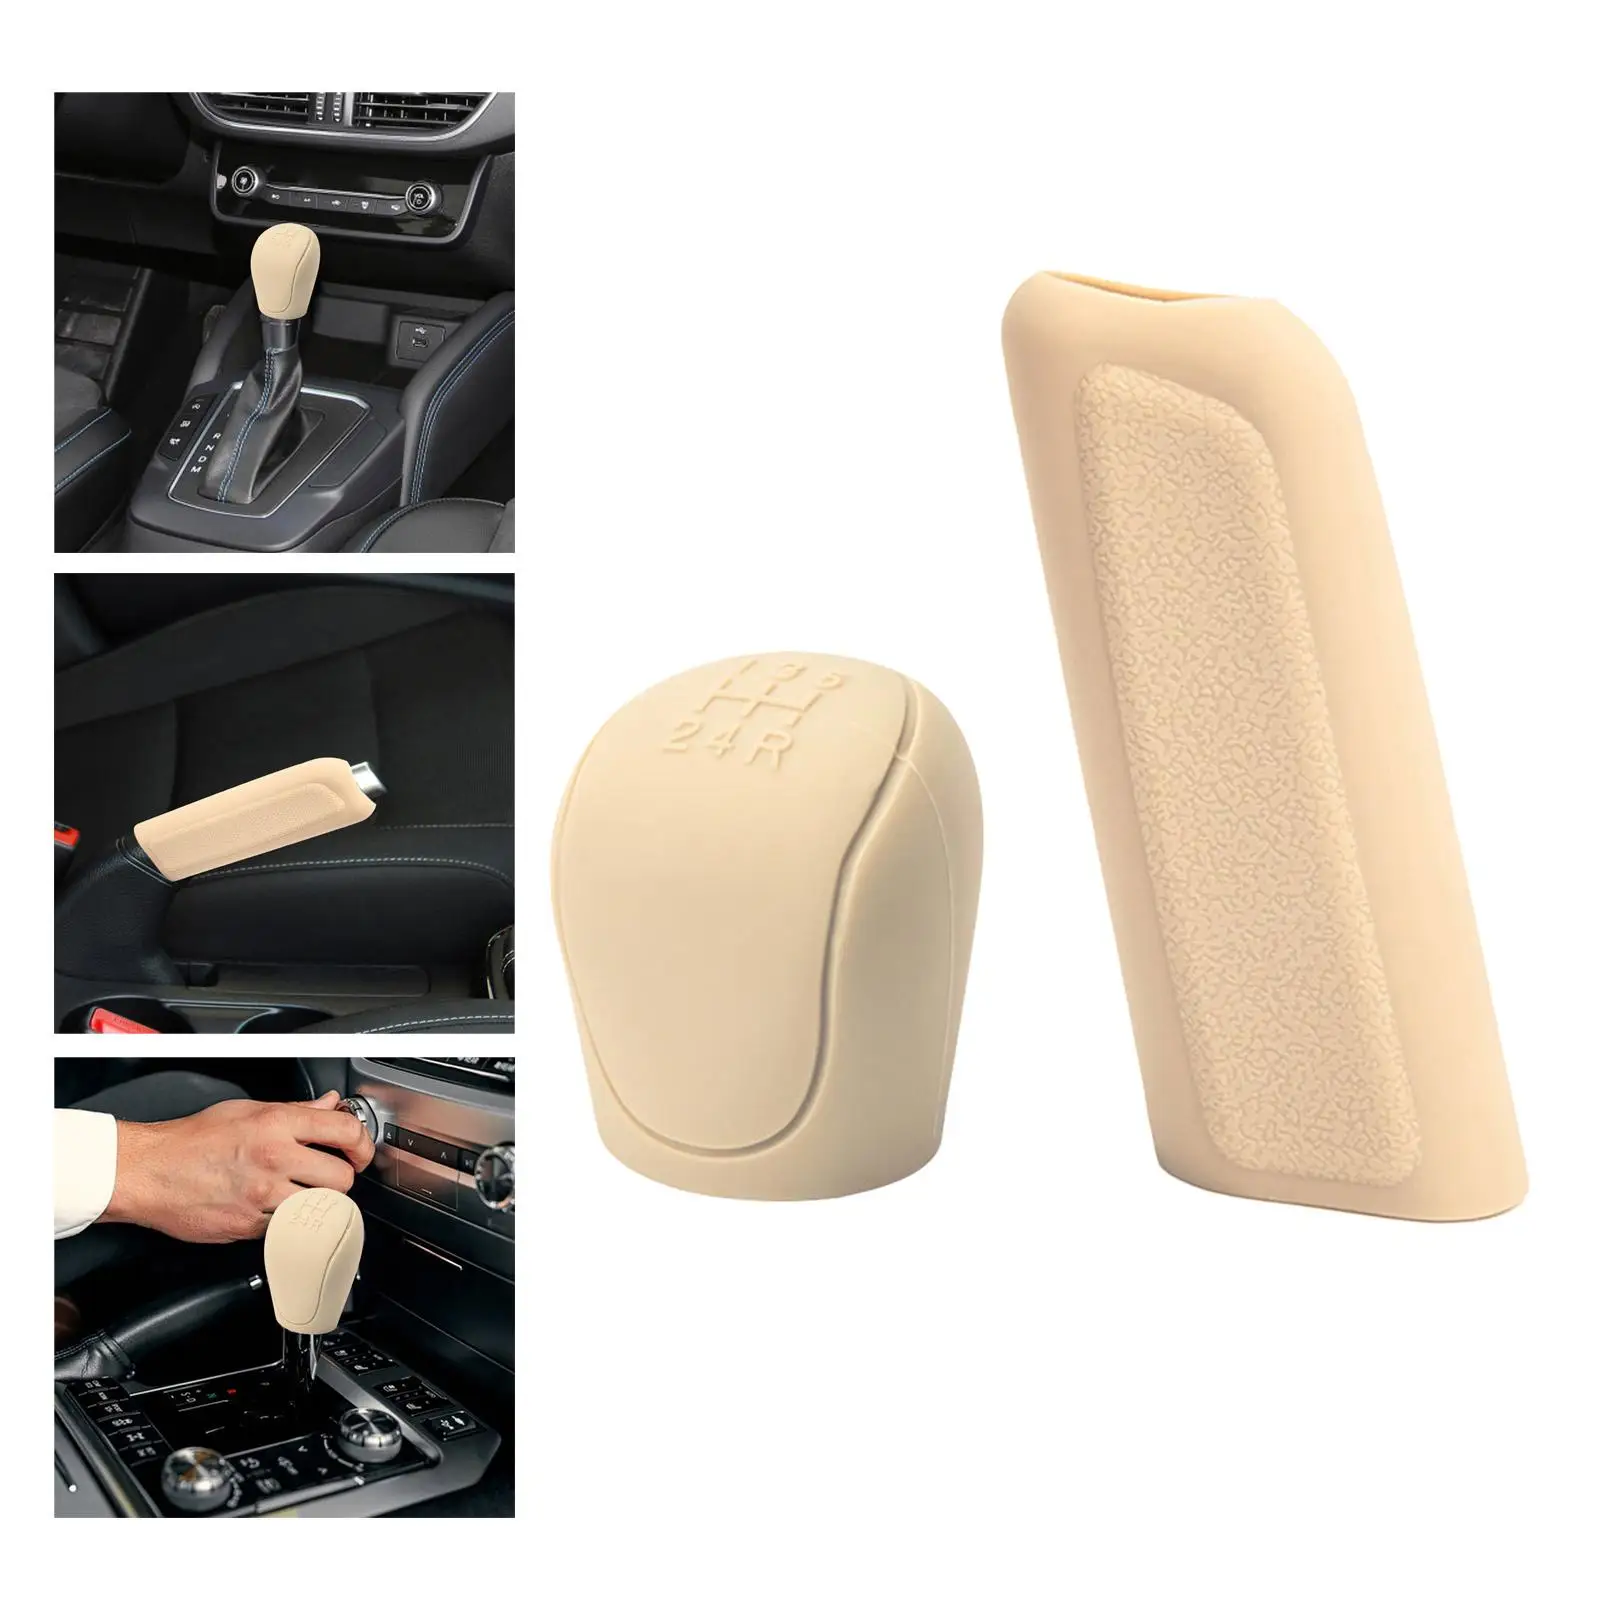 Gear Shift Knob Cover Silicone Handbrake Grip Cover for Ford Focus Replacement